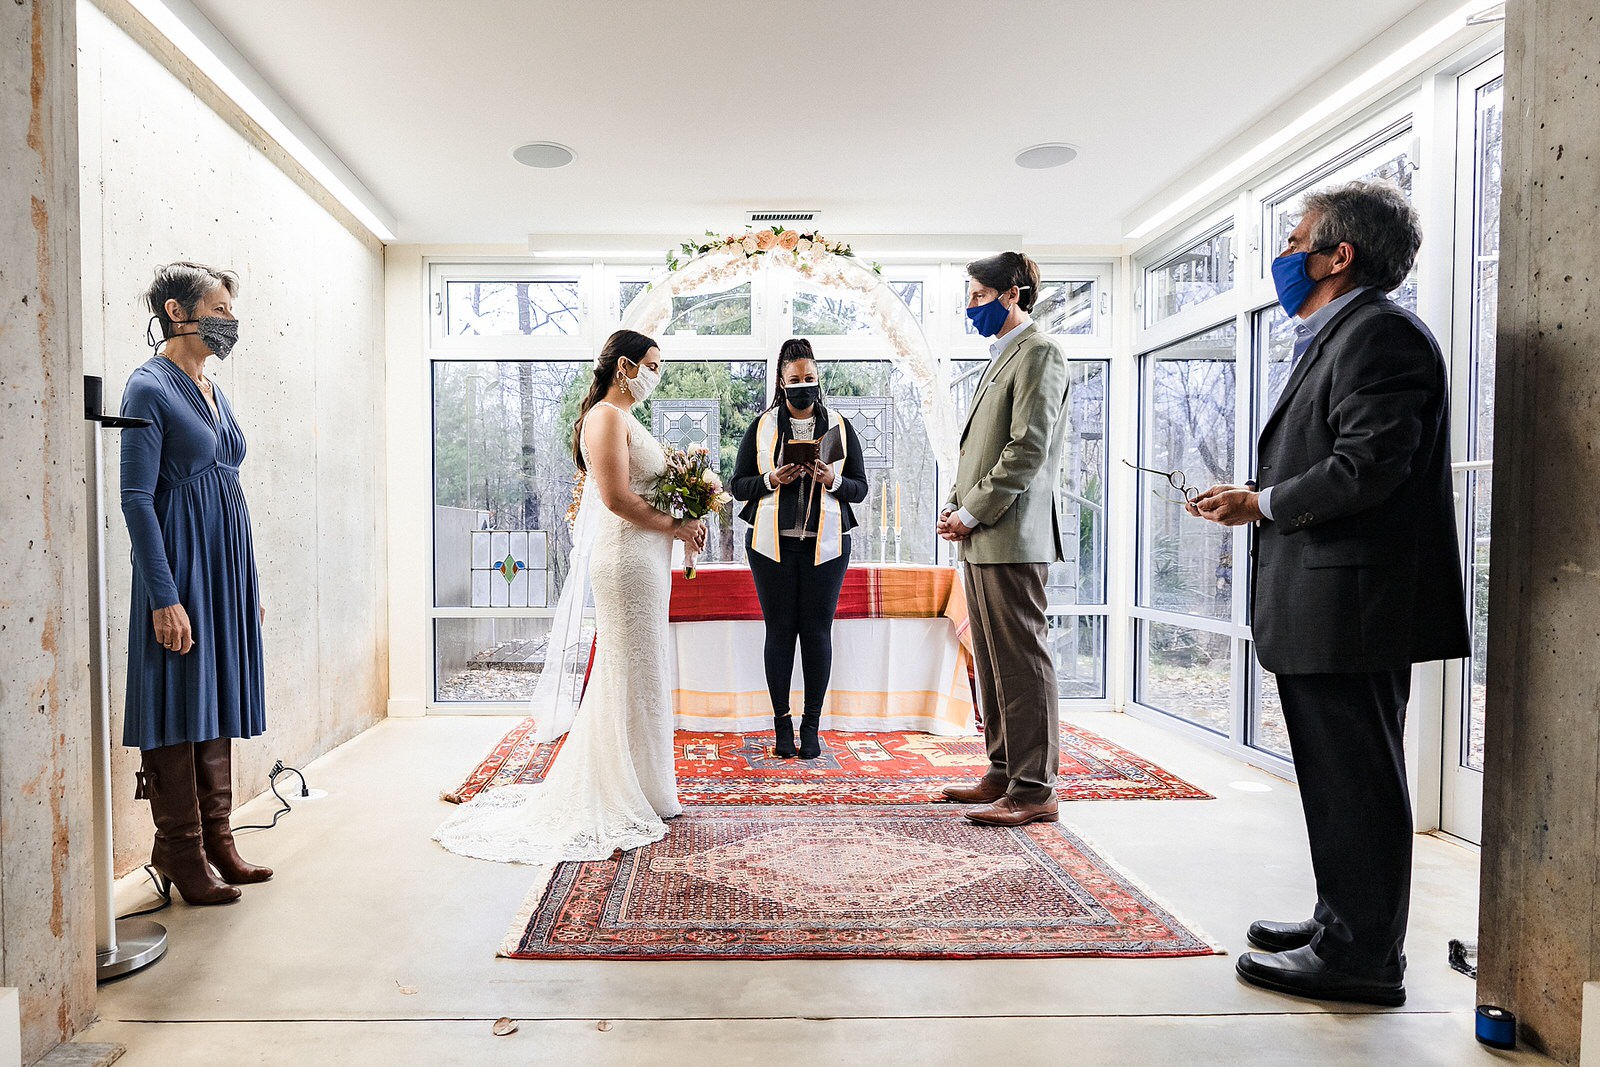 Covid meant couples were flexible with their weddings - J&K got married in the bride's basement!